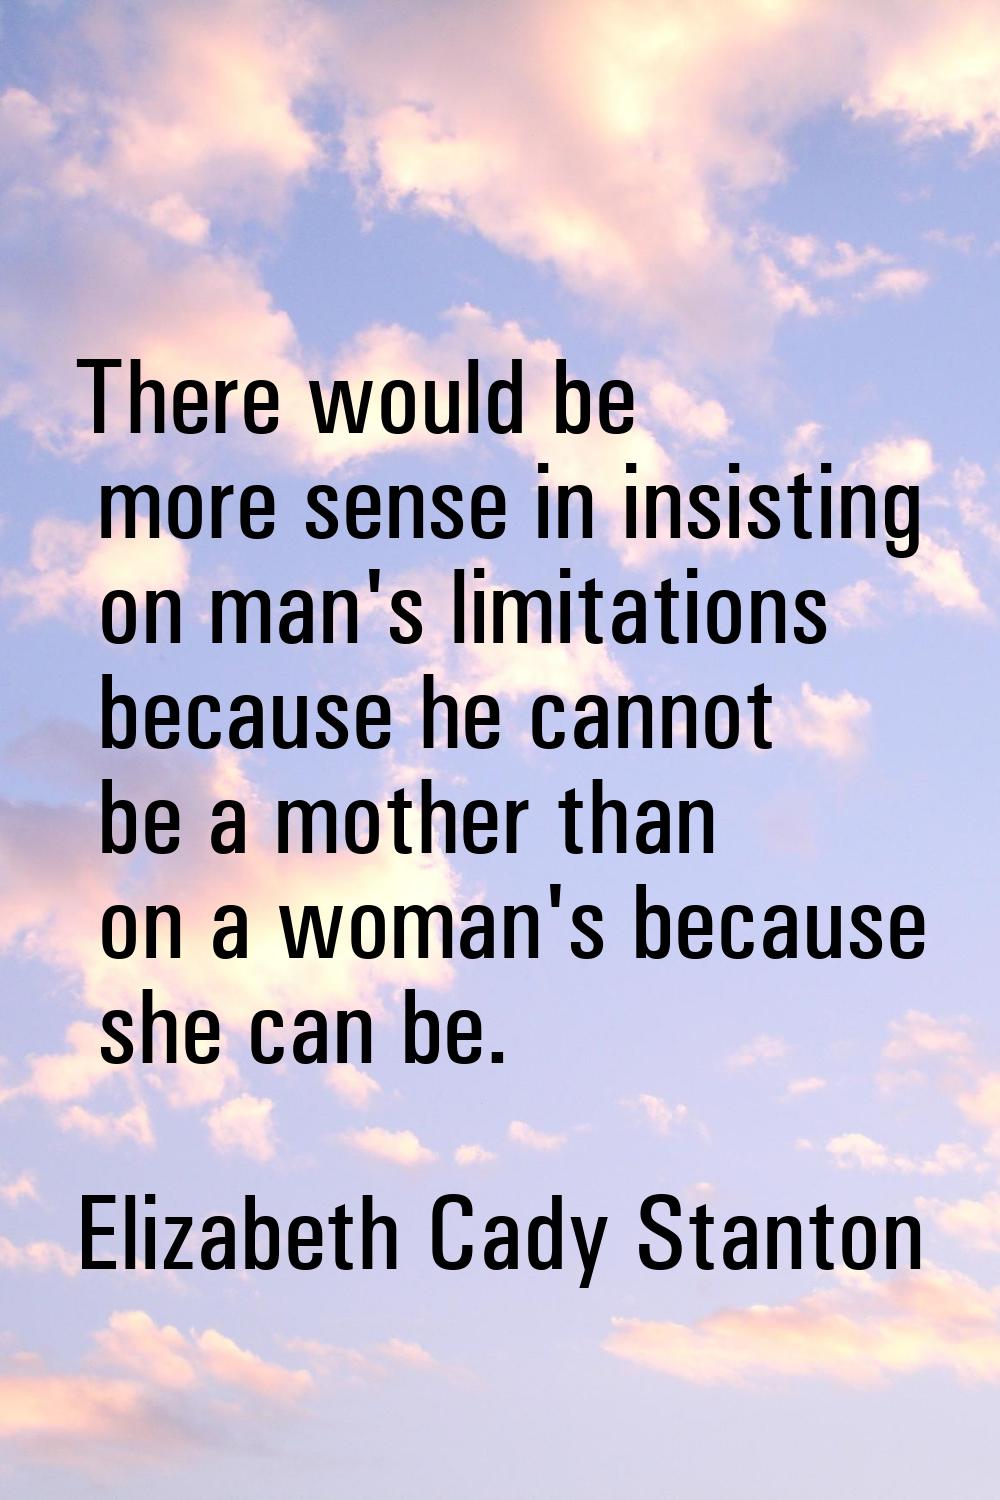 There would be more sense in insisting on man's limitations because he cannot be a mother than on a